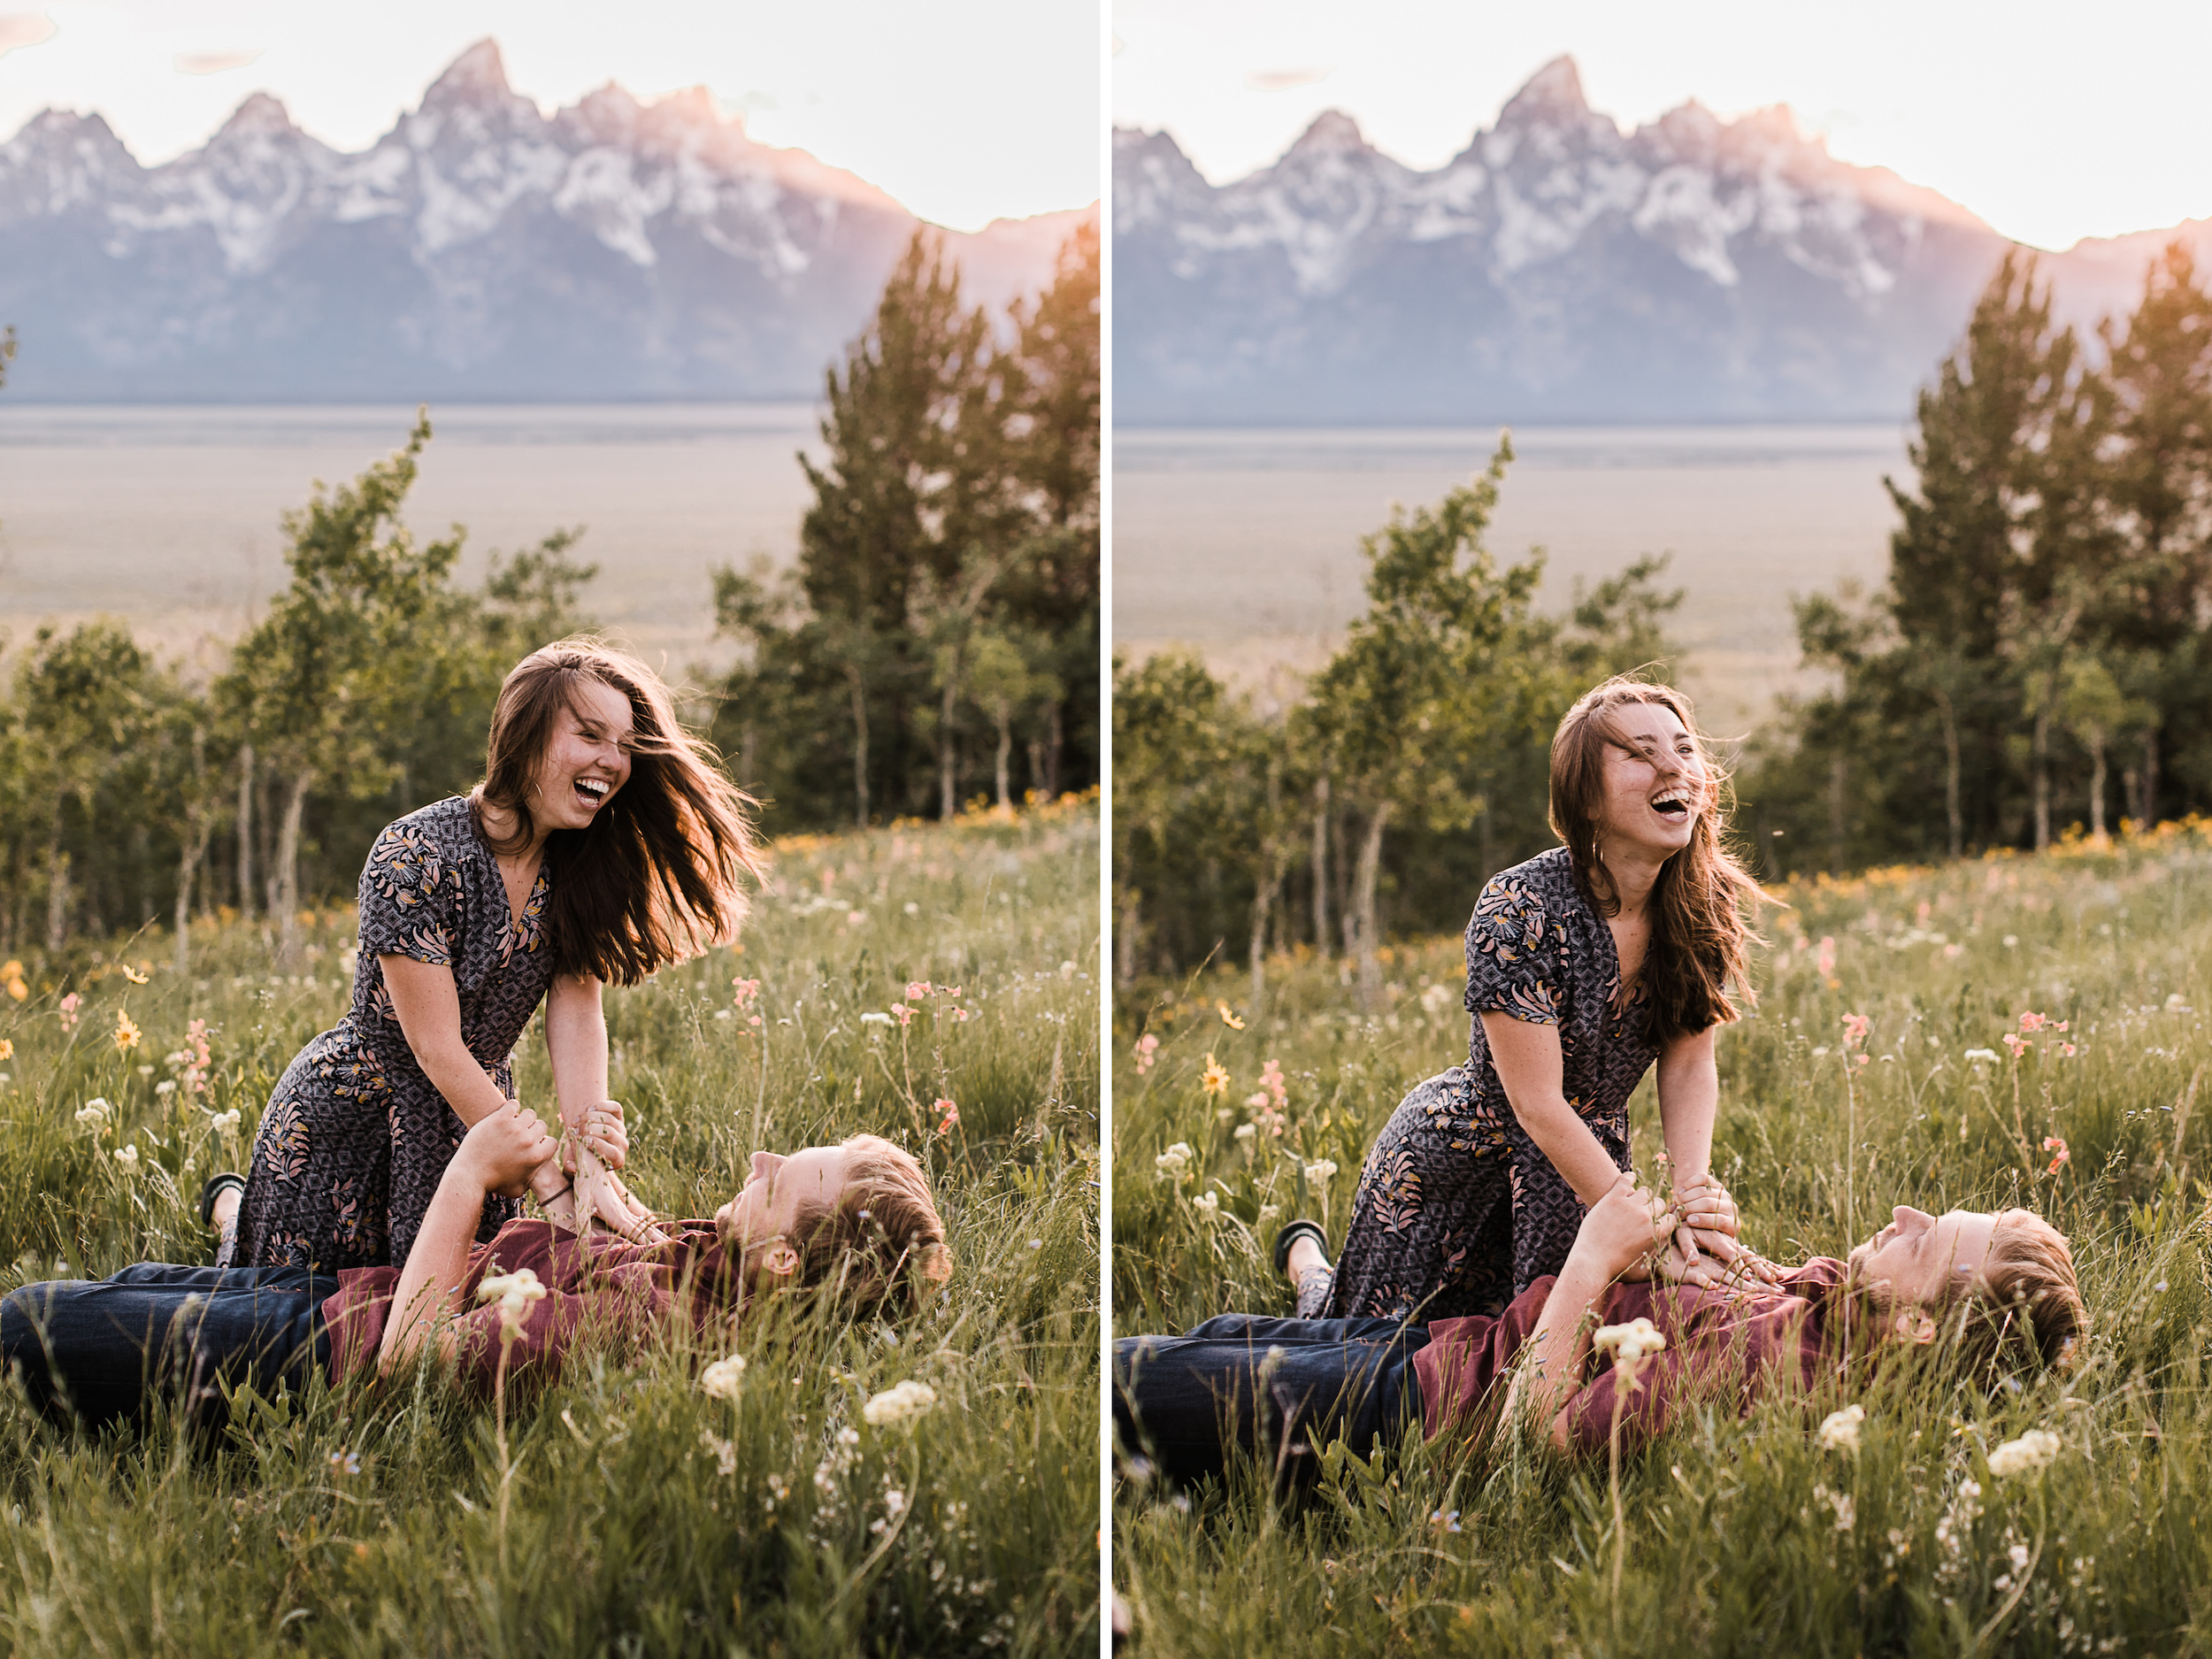 maggie + gary's adventure engagement session in grand teton national park | jackson hole, wyoming wedding photographer | the hearnes adventure photography